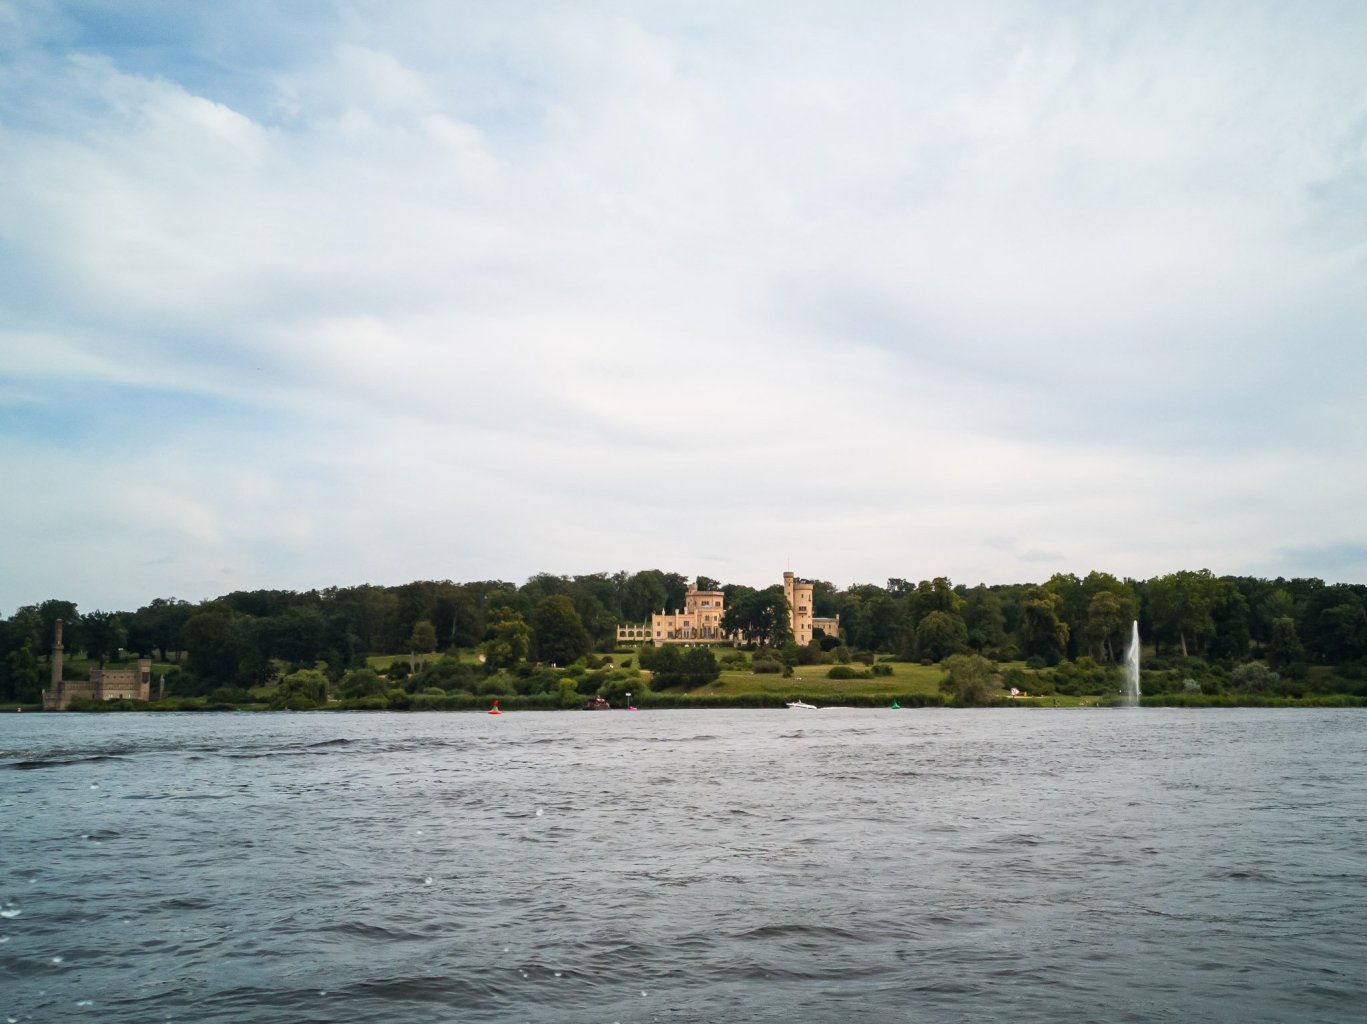 Babelsberg palace (centre) and the steam engine house (left) that powered - among other things - the fountain on the right.